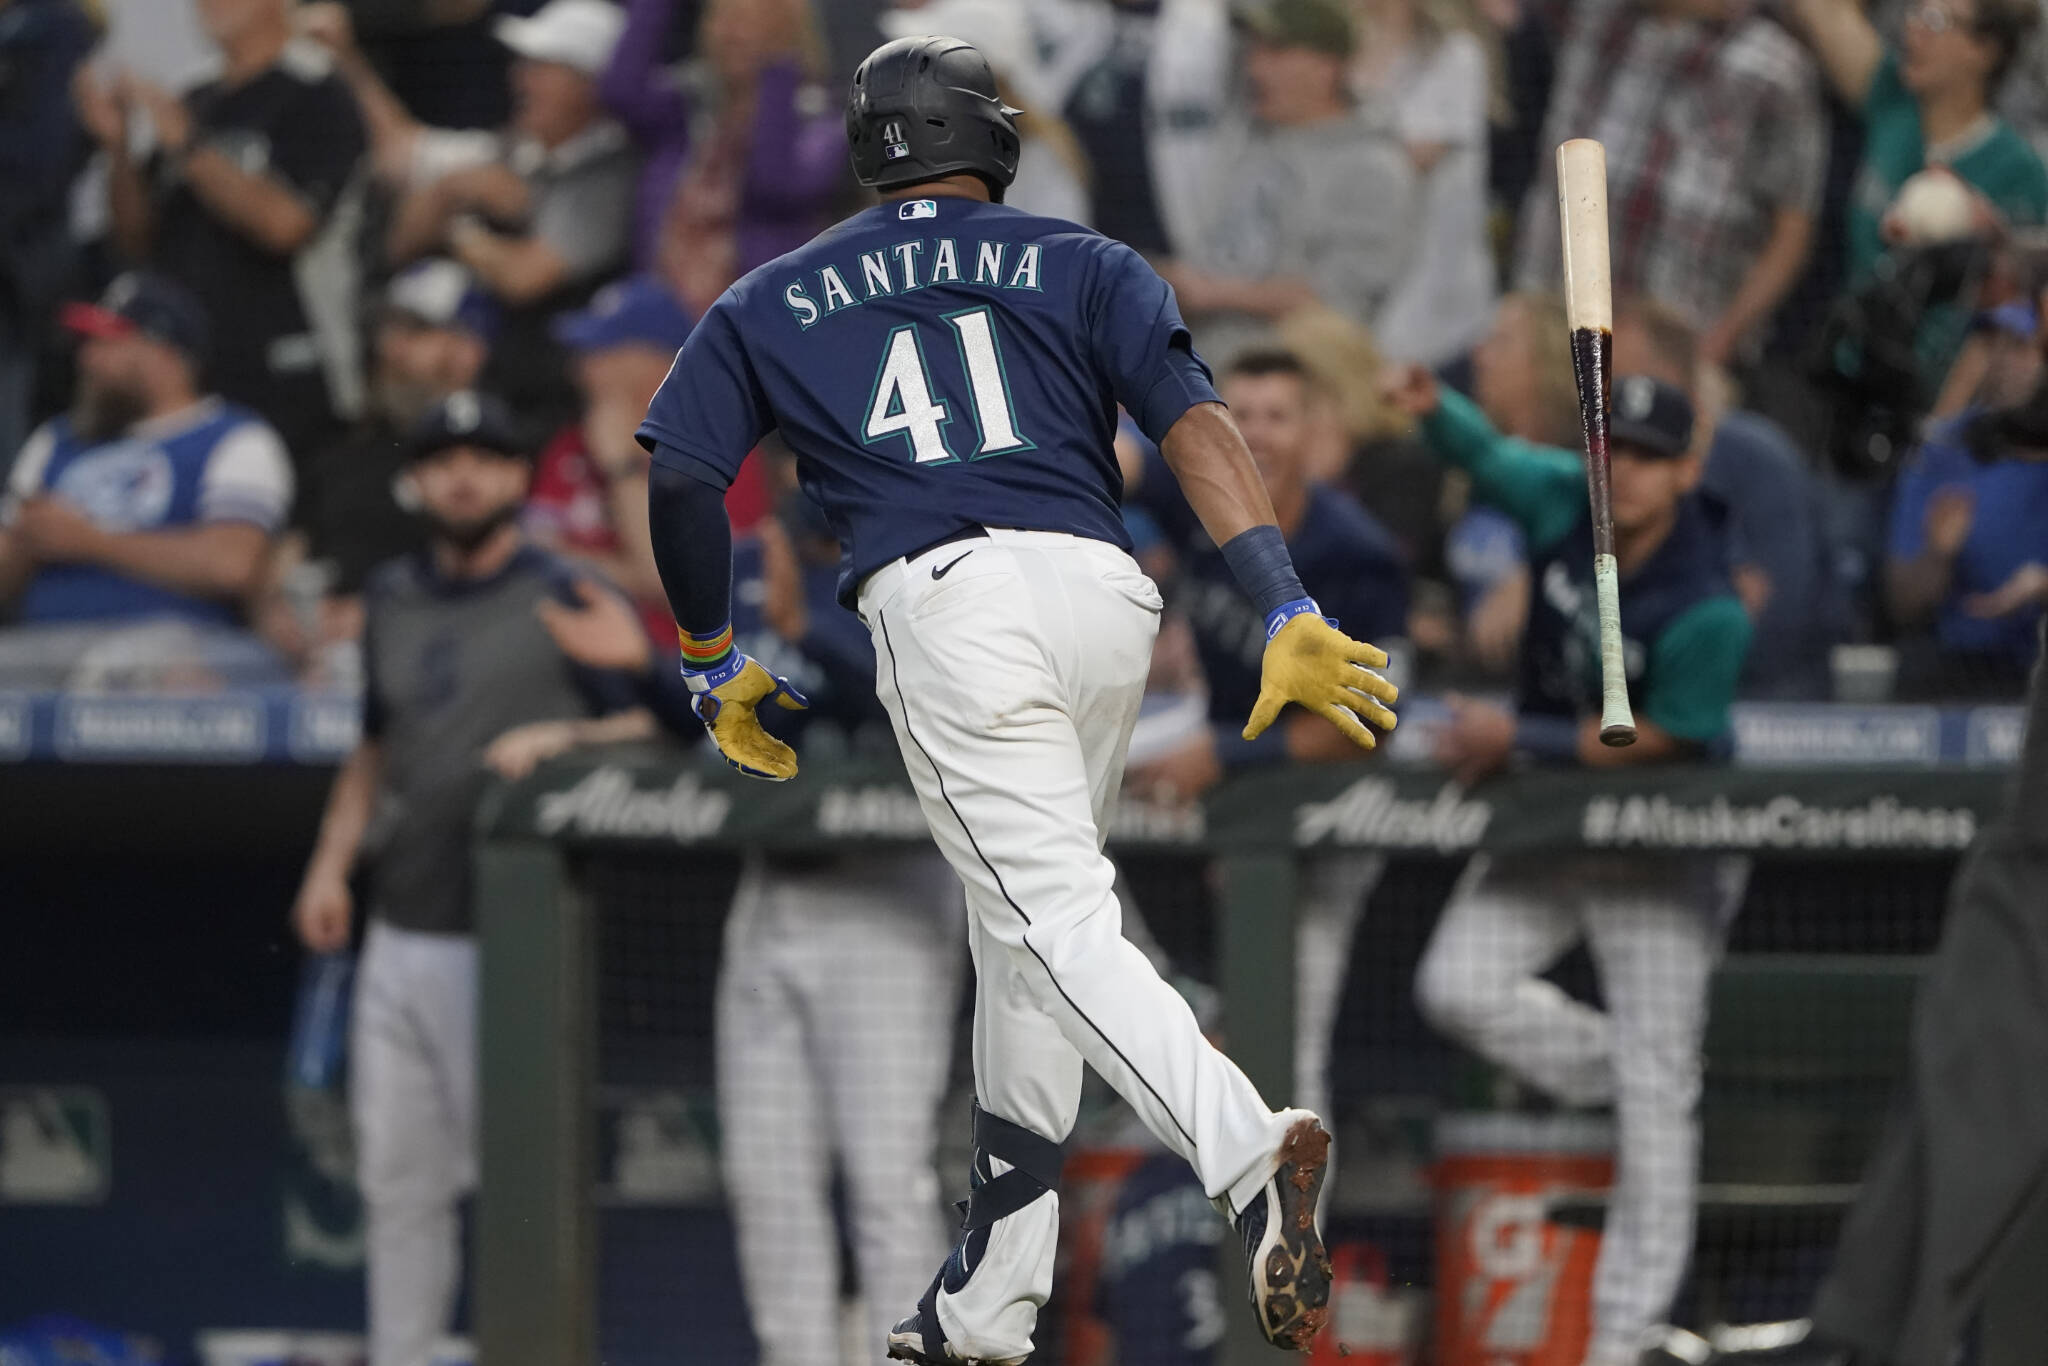 The Mariners’ Carlos Santana tosses his bat after he hit a two-run home run during the seventh inning of a game against the Blue Jays on Saturday in Seattle. (AP Photo/Ted S. Warren)